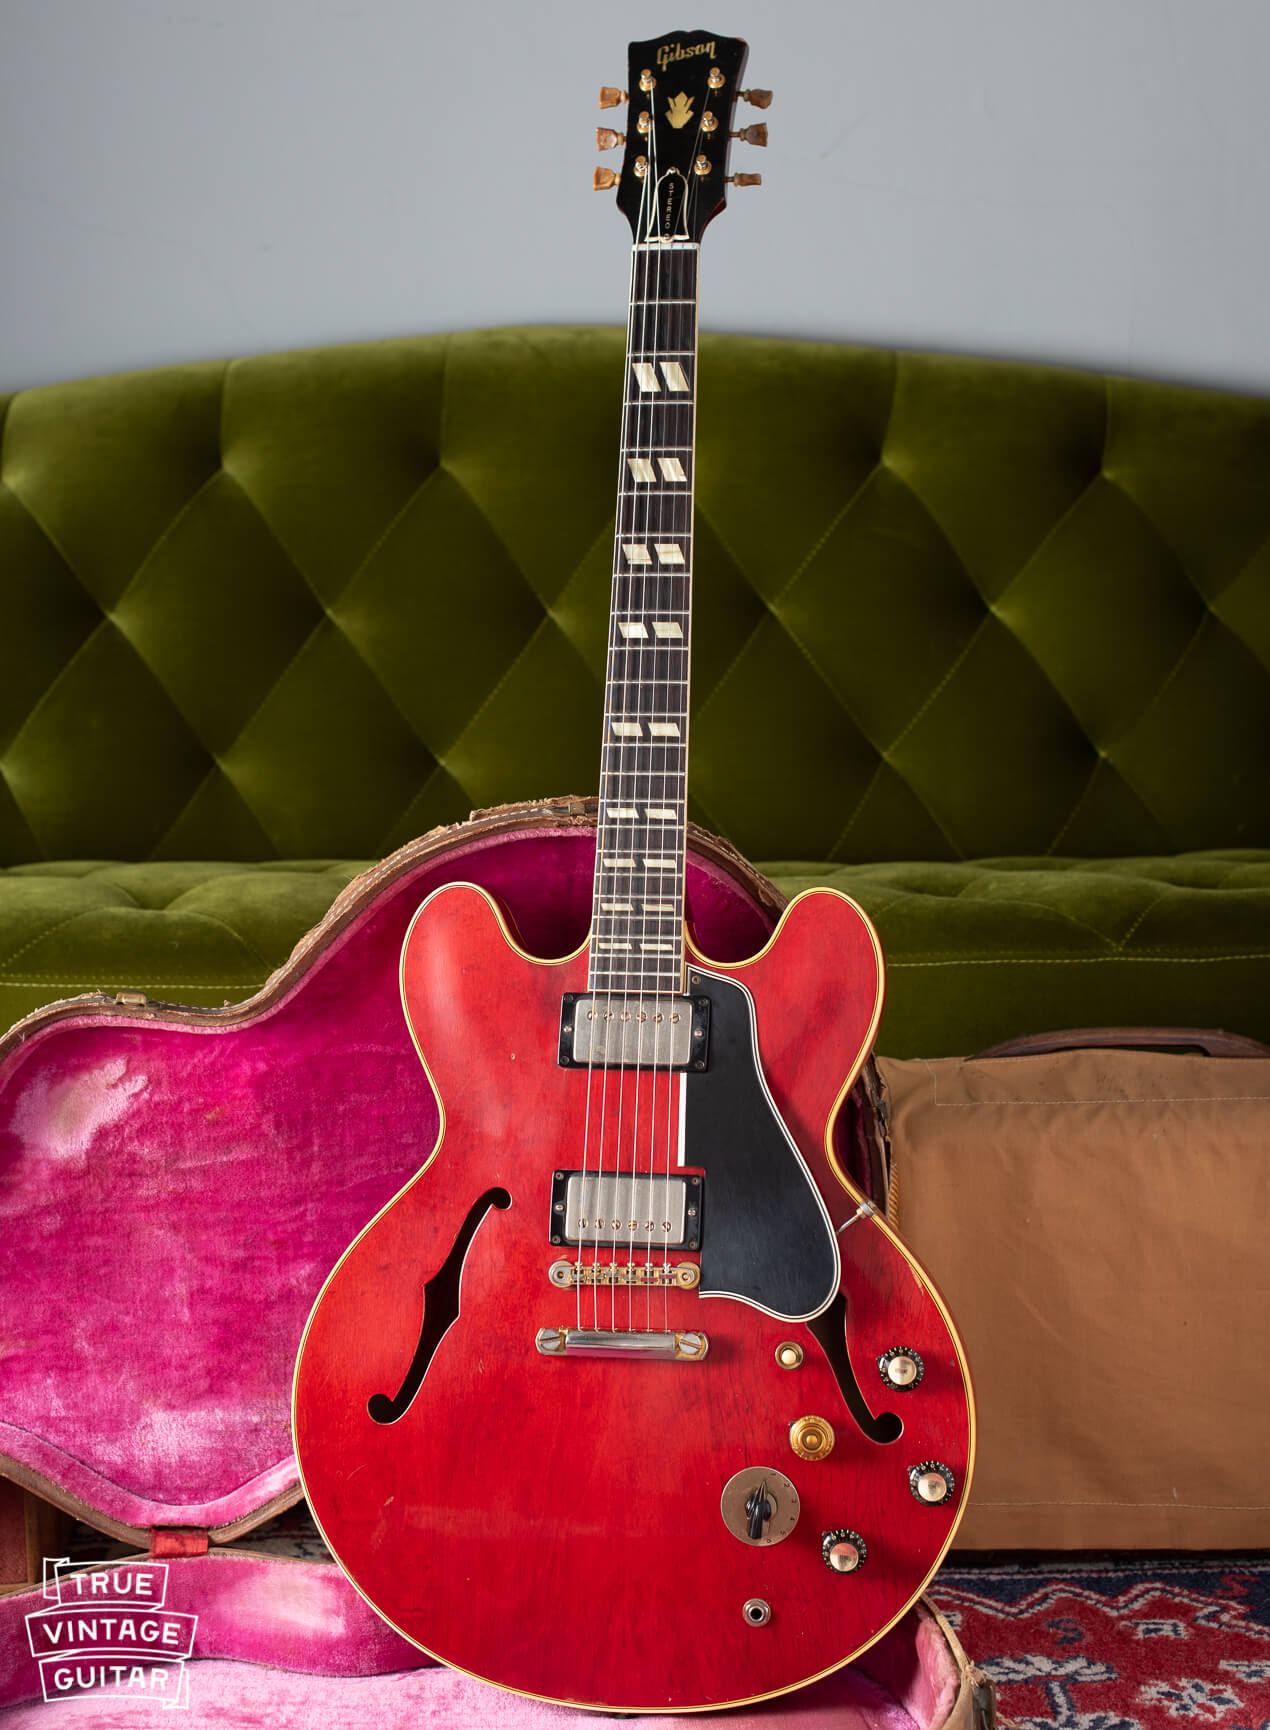 1960 Gibson ES-345 information with production totals and price in 1960